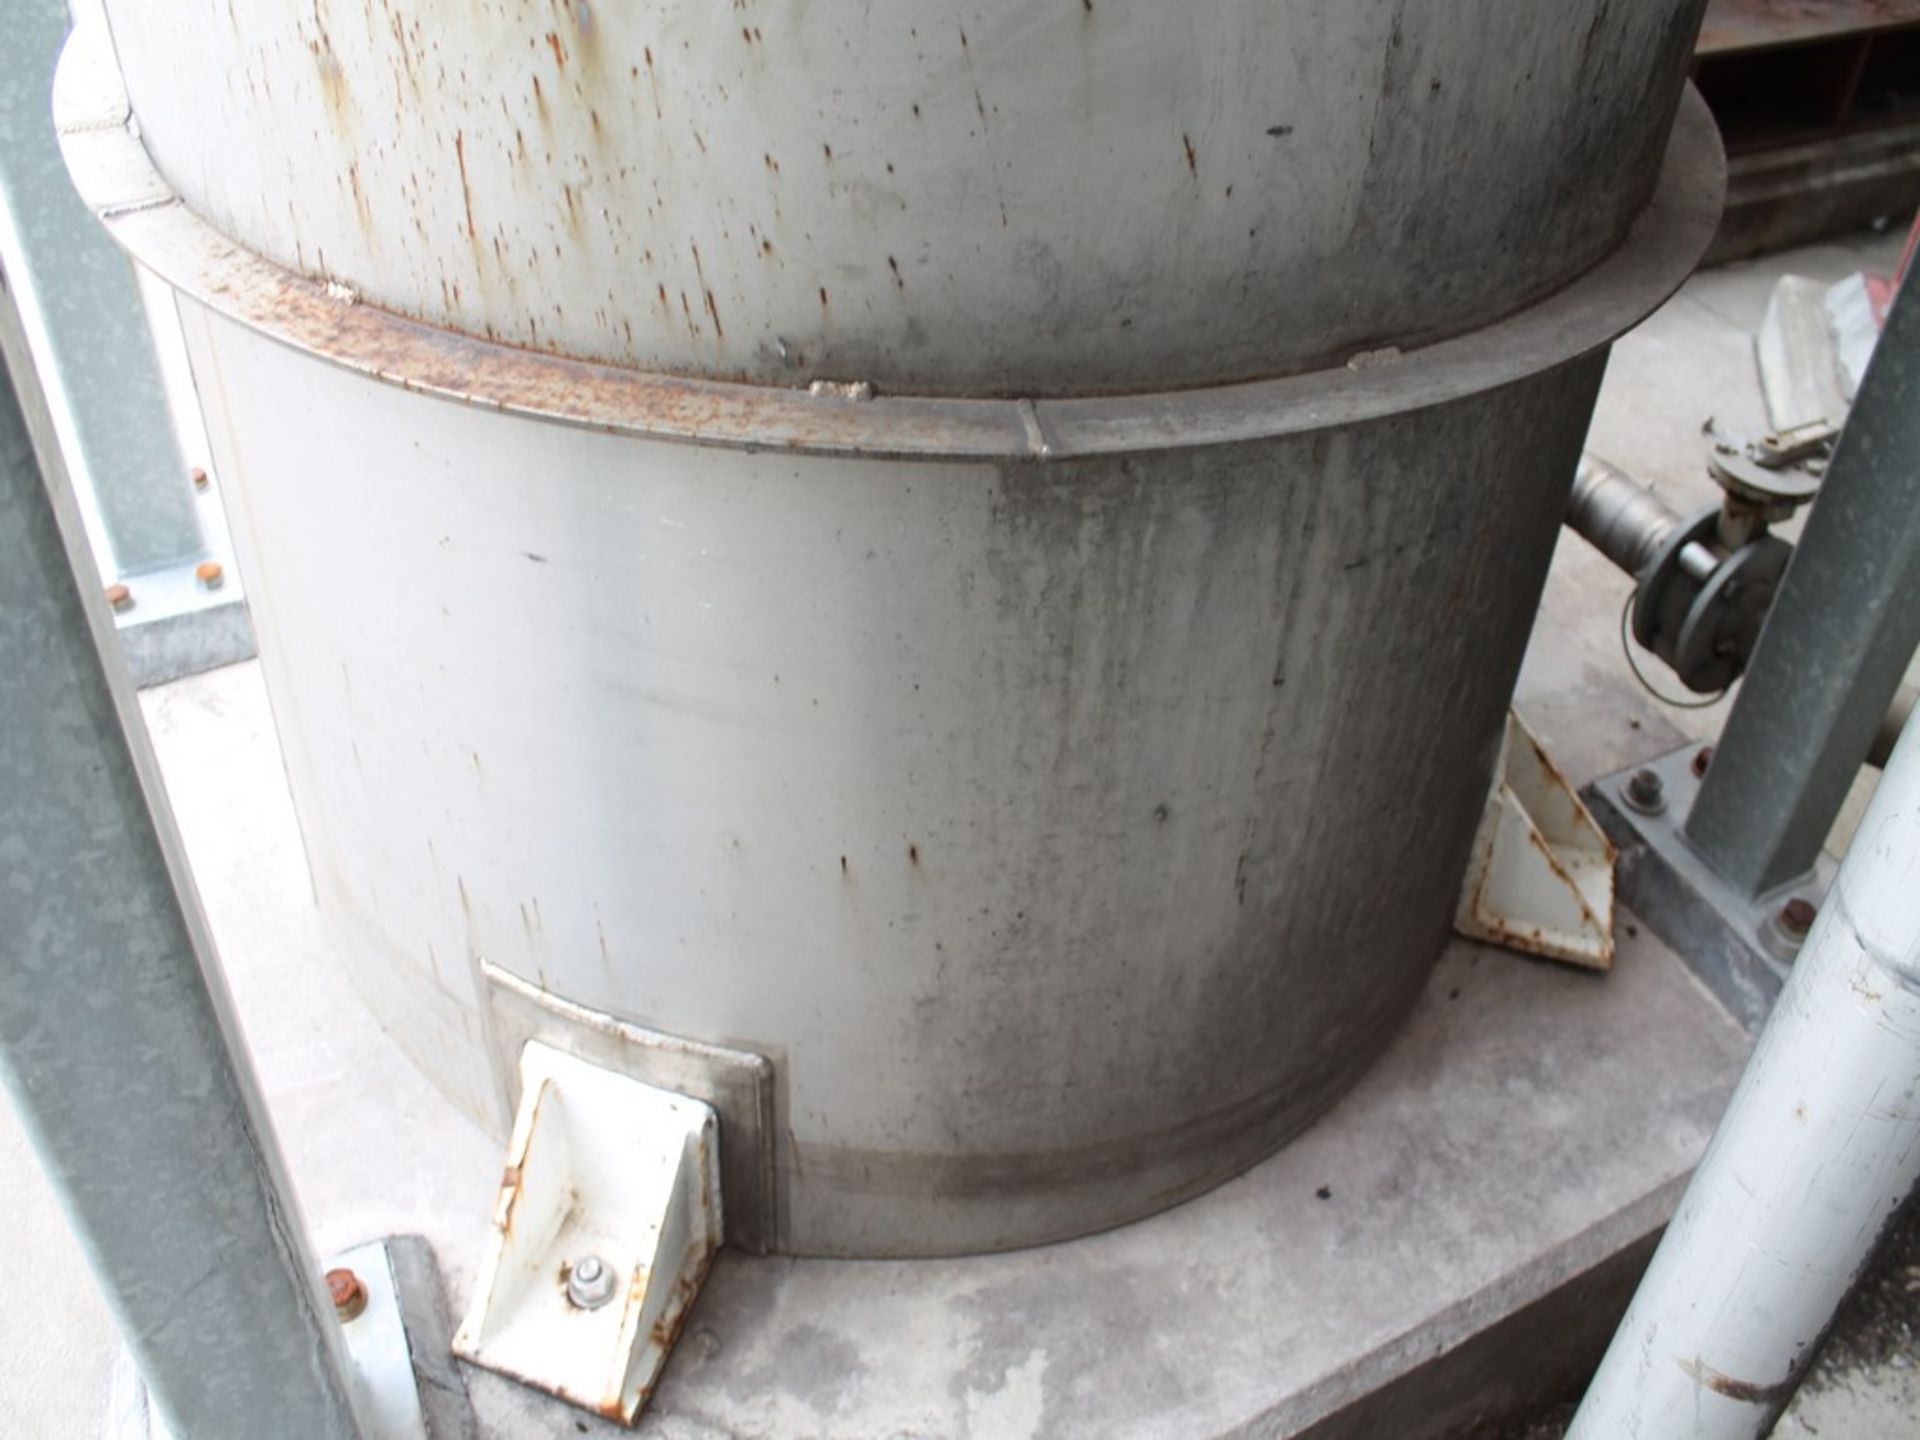 INTERNATIONAL PRODUCTION SPECIALISTS INC. LOT STAINLESS STEEL WASH SOLVENT TANK - Image 10 of 13